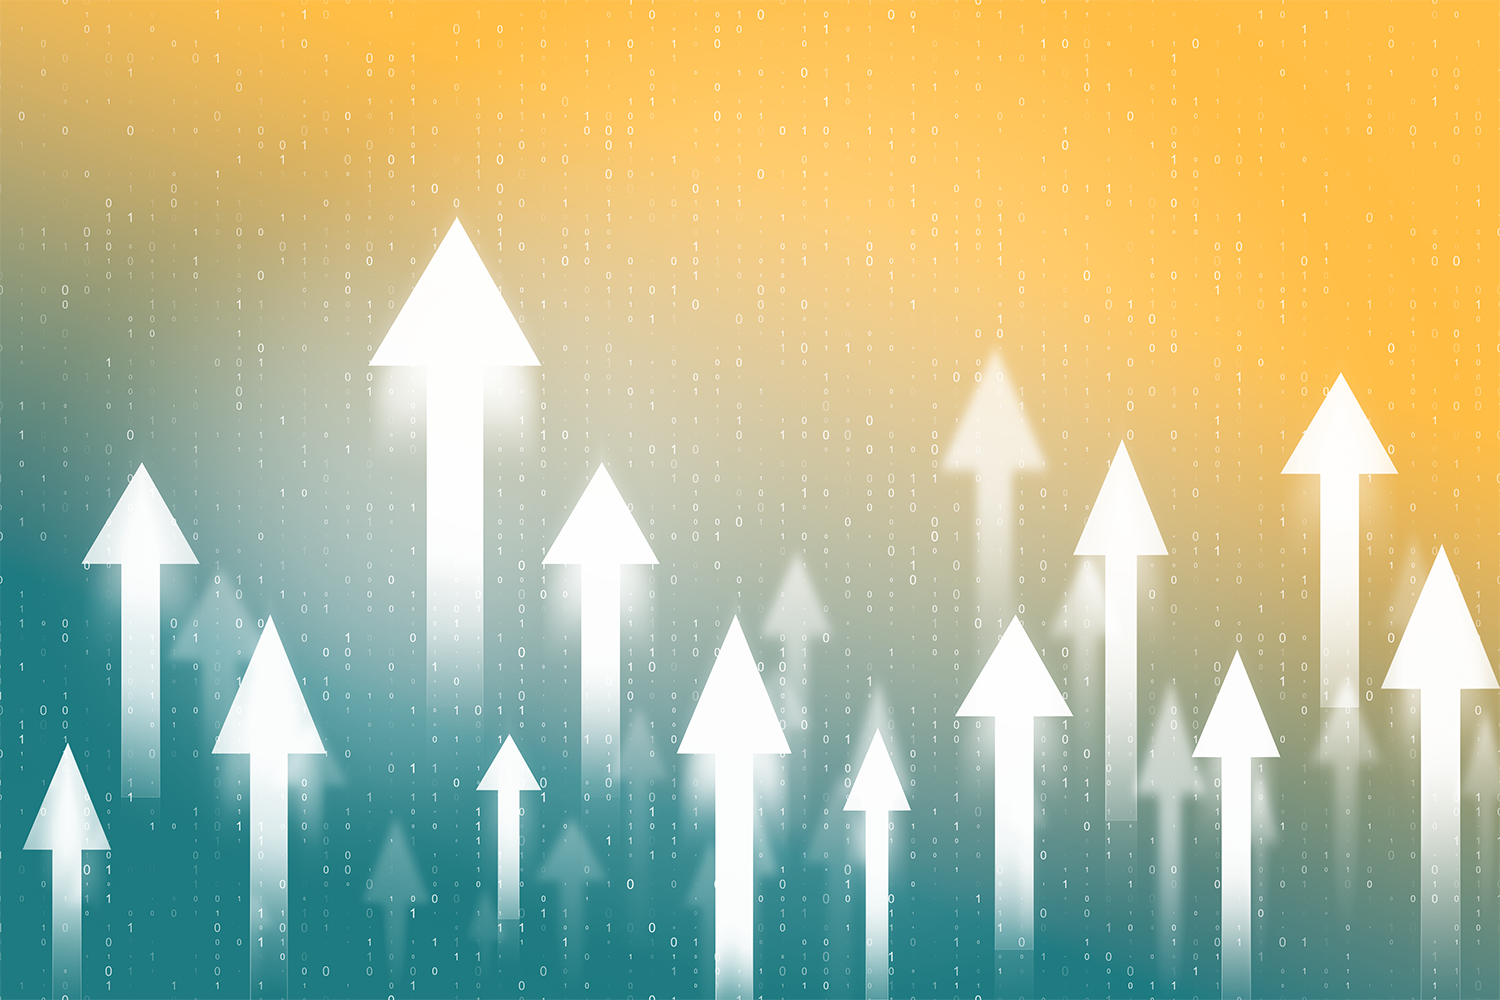 A series of arrows pointing upward, teal and gold gradient background